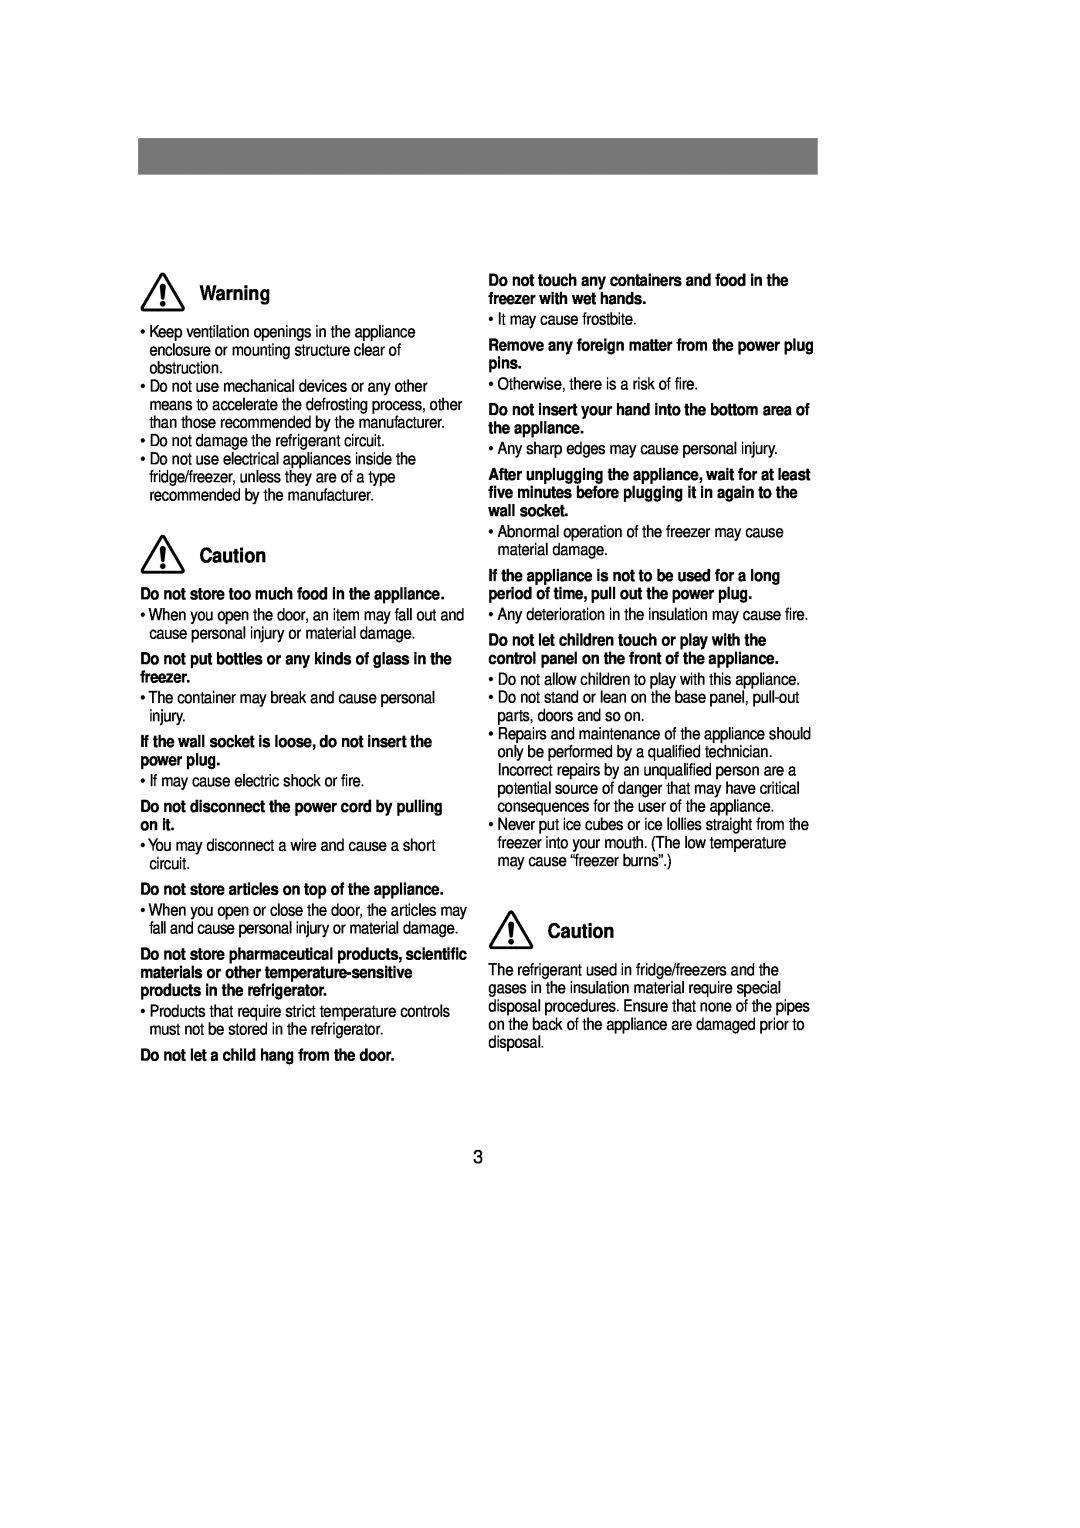 Samsung Rl 39 manual Do not store too much food in the appliance, Do not disconnect the power cord by pulling on it 